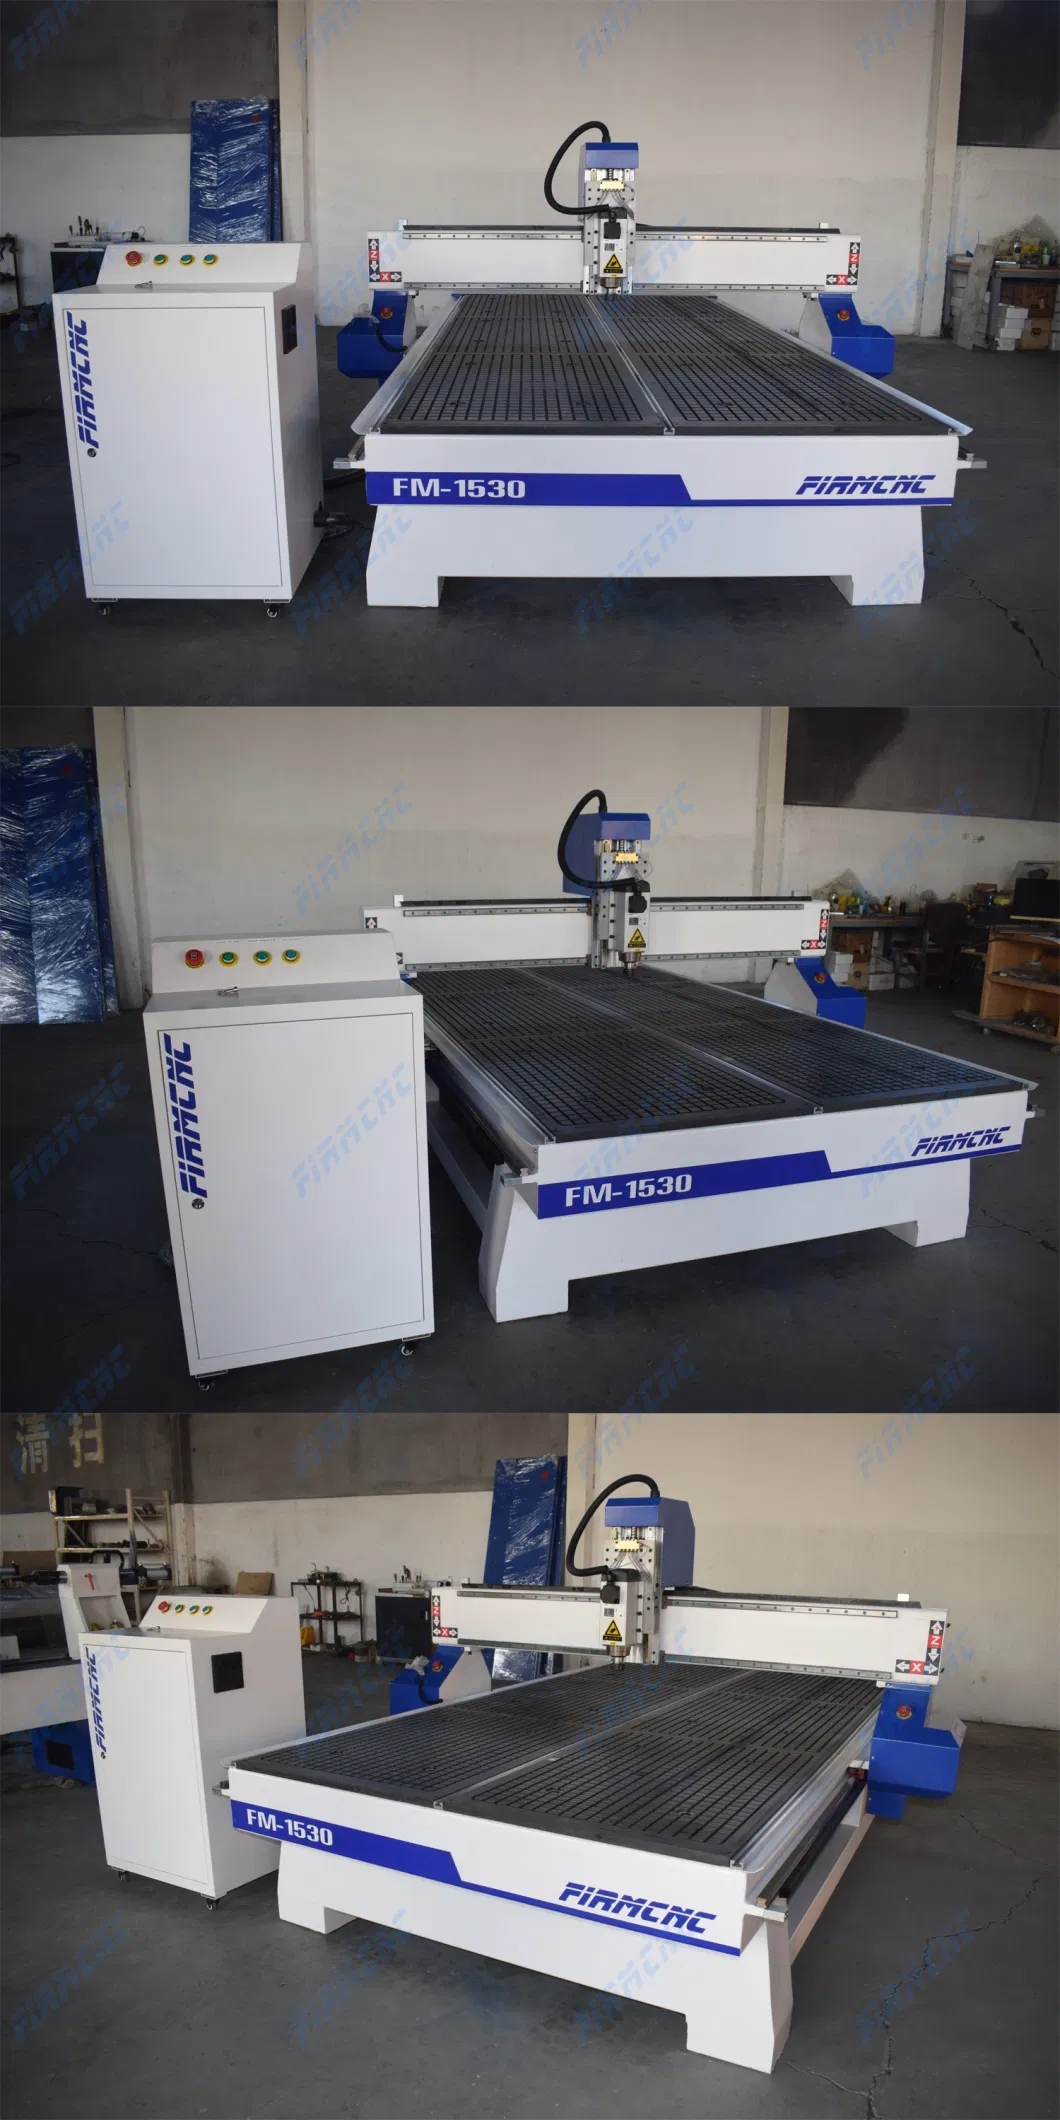 High Quality 3 Axis CNC Wood Engraving Cutting Machine Woodworking 1530 CNC Router Price